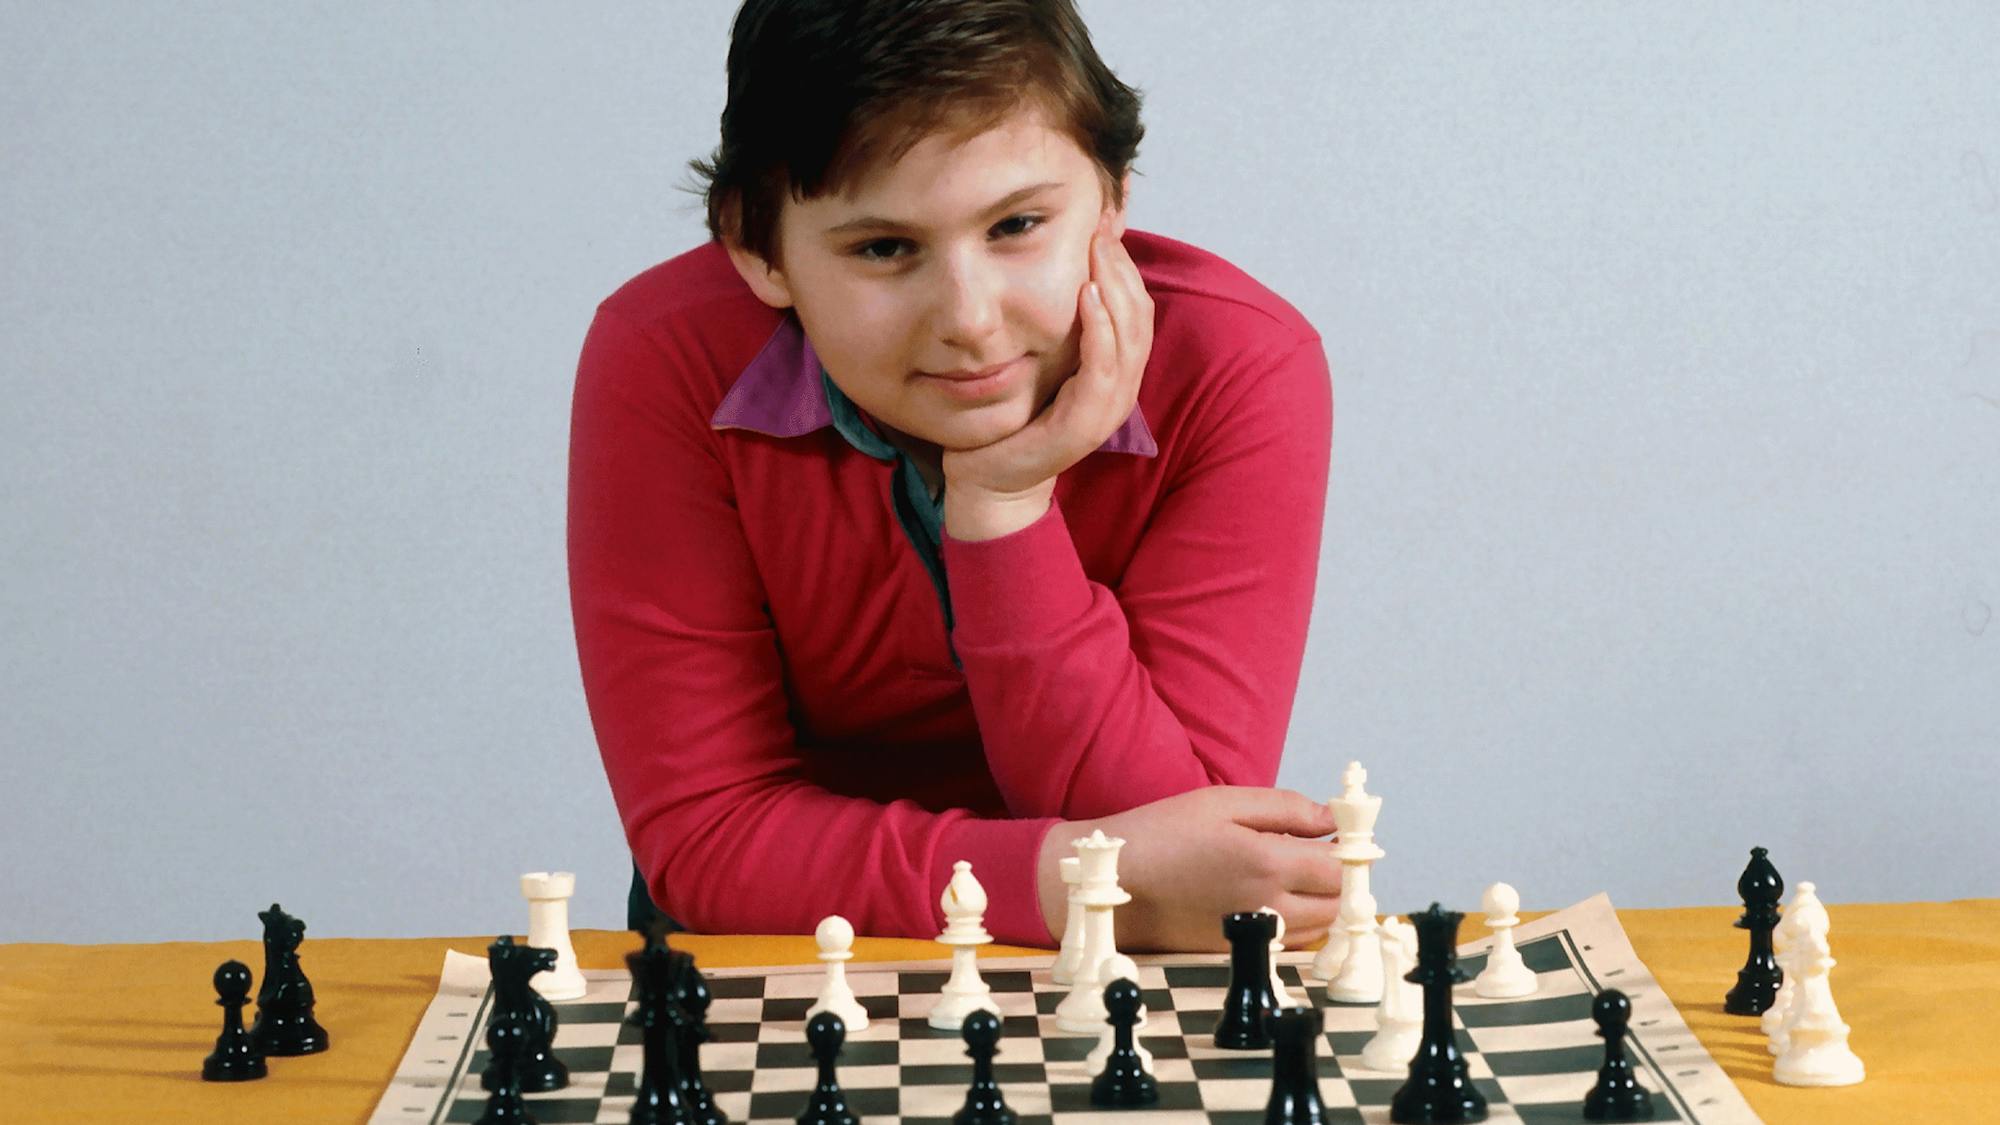 Polgár at age 9. Sporting a bright red shirt and close-cropped hair, she leans over a paper chess board, cupping her face in her hand.